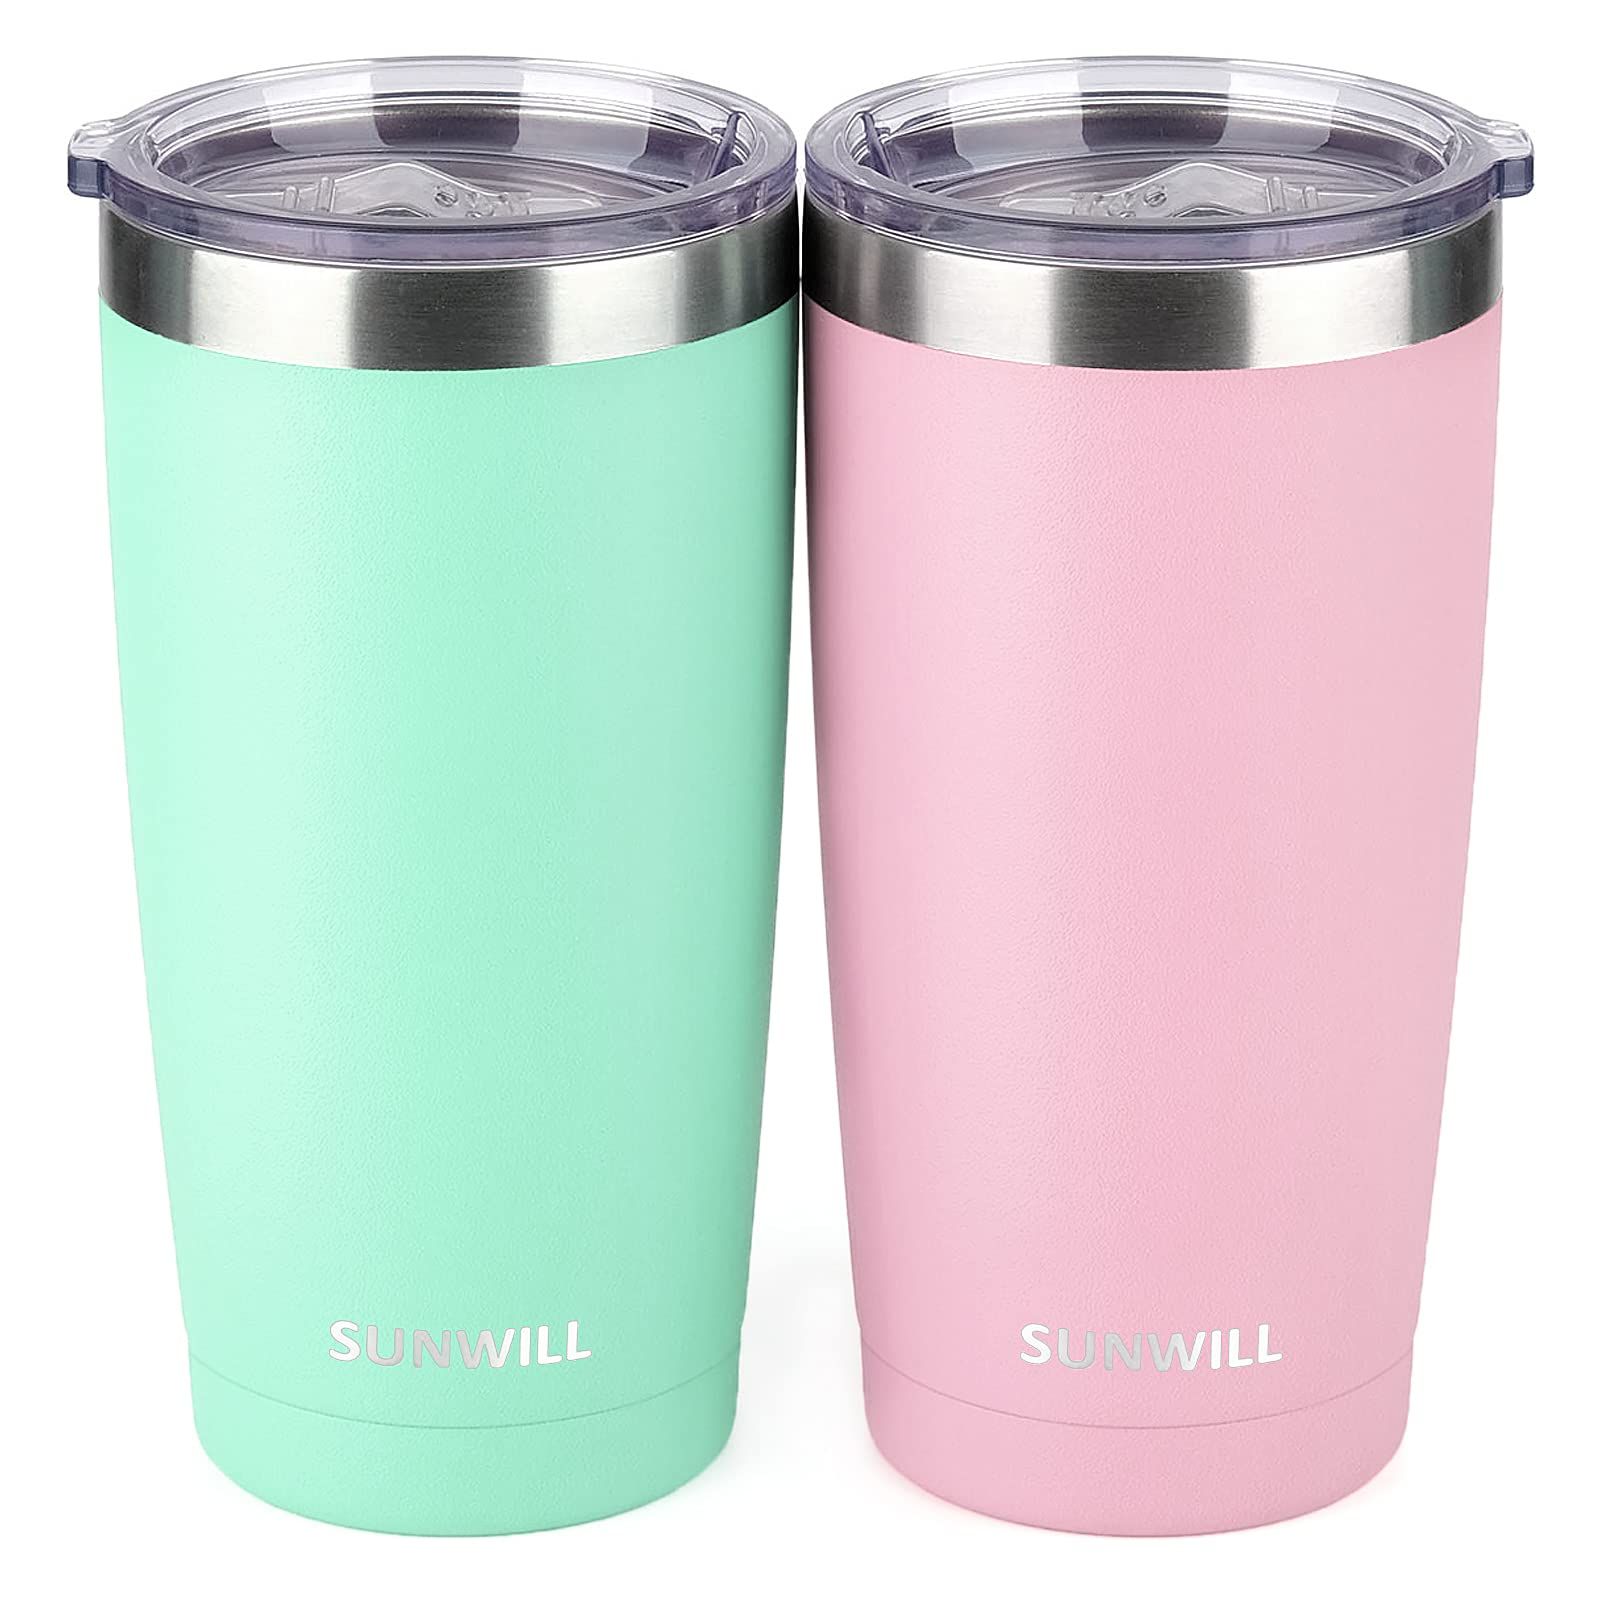 SUNWILL Insulated Coffee Mug Set of 2, 20 oz Tumbler with Lid, Stainless Steel Vacuum Double Wall Tr | Amazon (US)